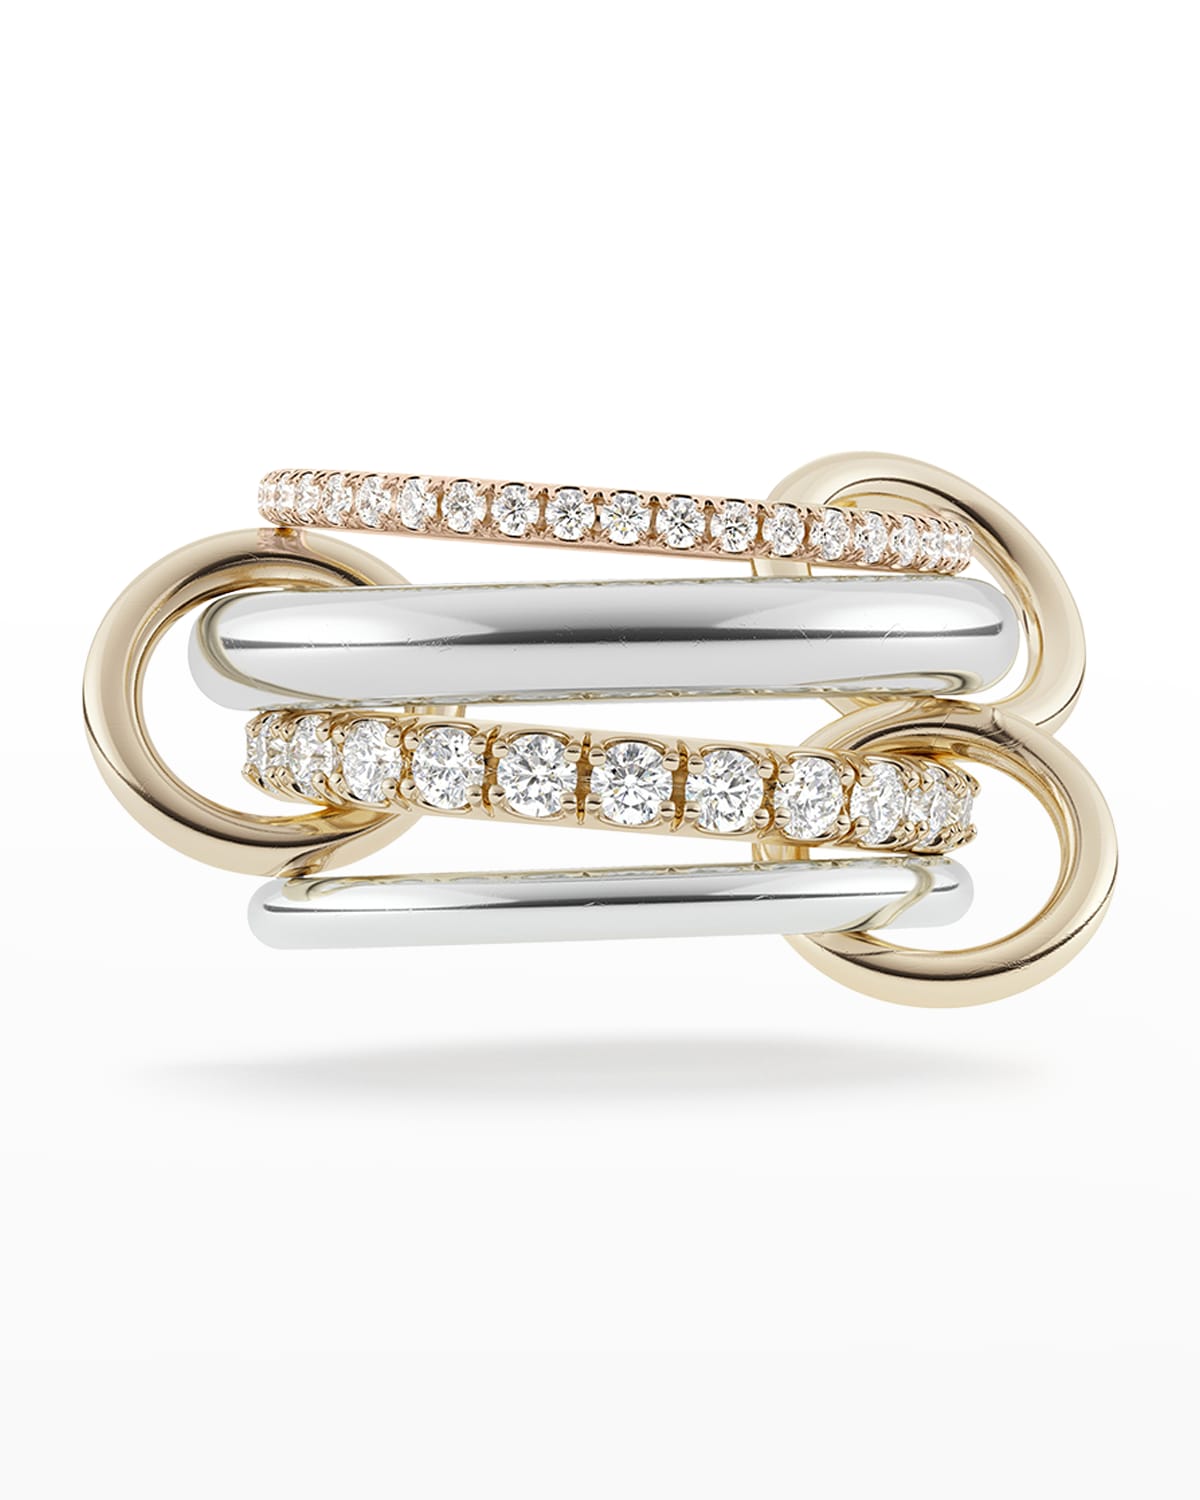 SPINELLI KILCOLLIN TWO-TONE 4-LINK RING WITH DIAMONDS